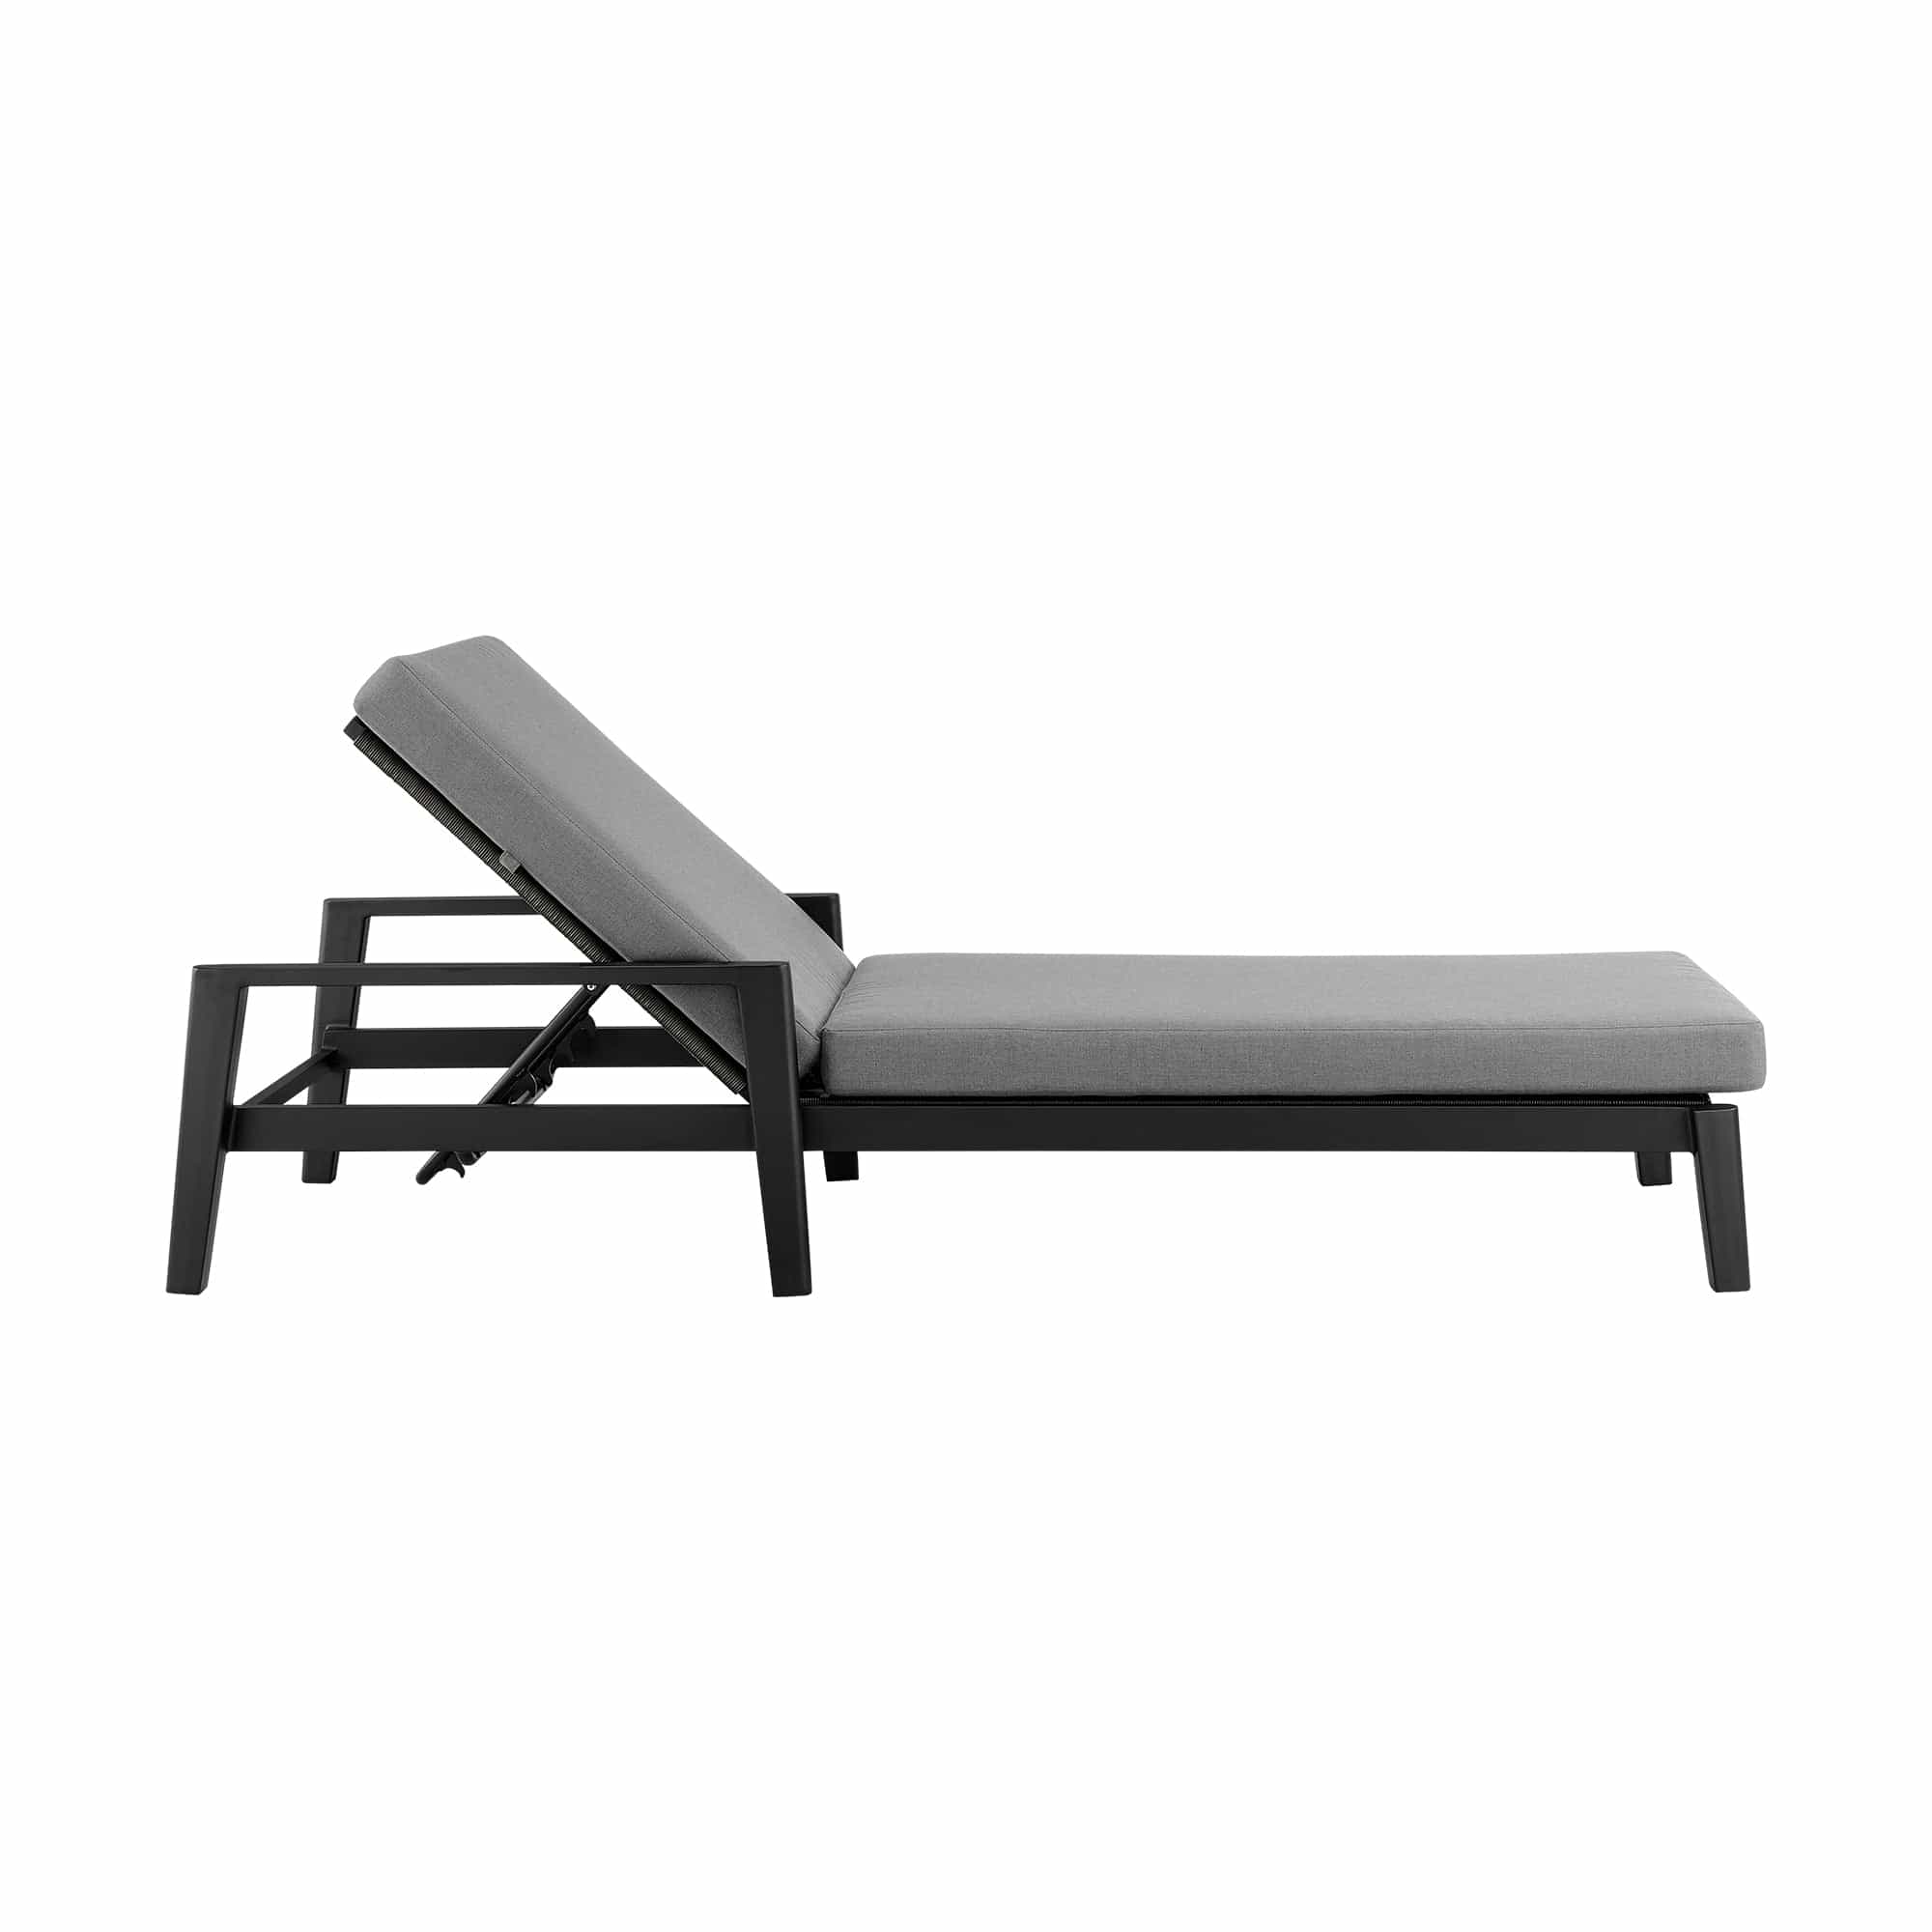 Armen Living Outdoor Chaise Lounge Armen Living | Cayman Outdoor Patio Adjustable Chaise Lounge Chair in Aluminum with Grey Cushions | LCCCLOBL